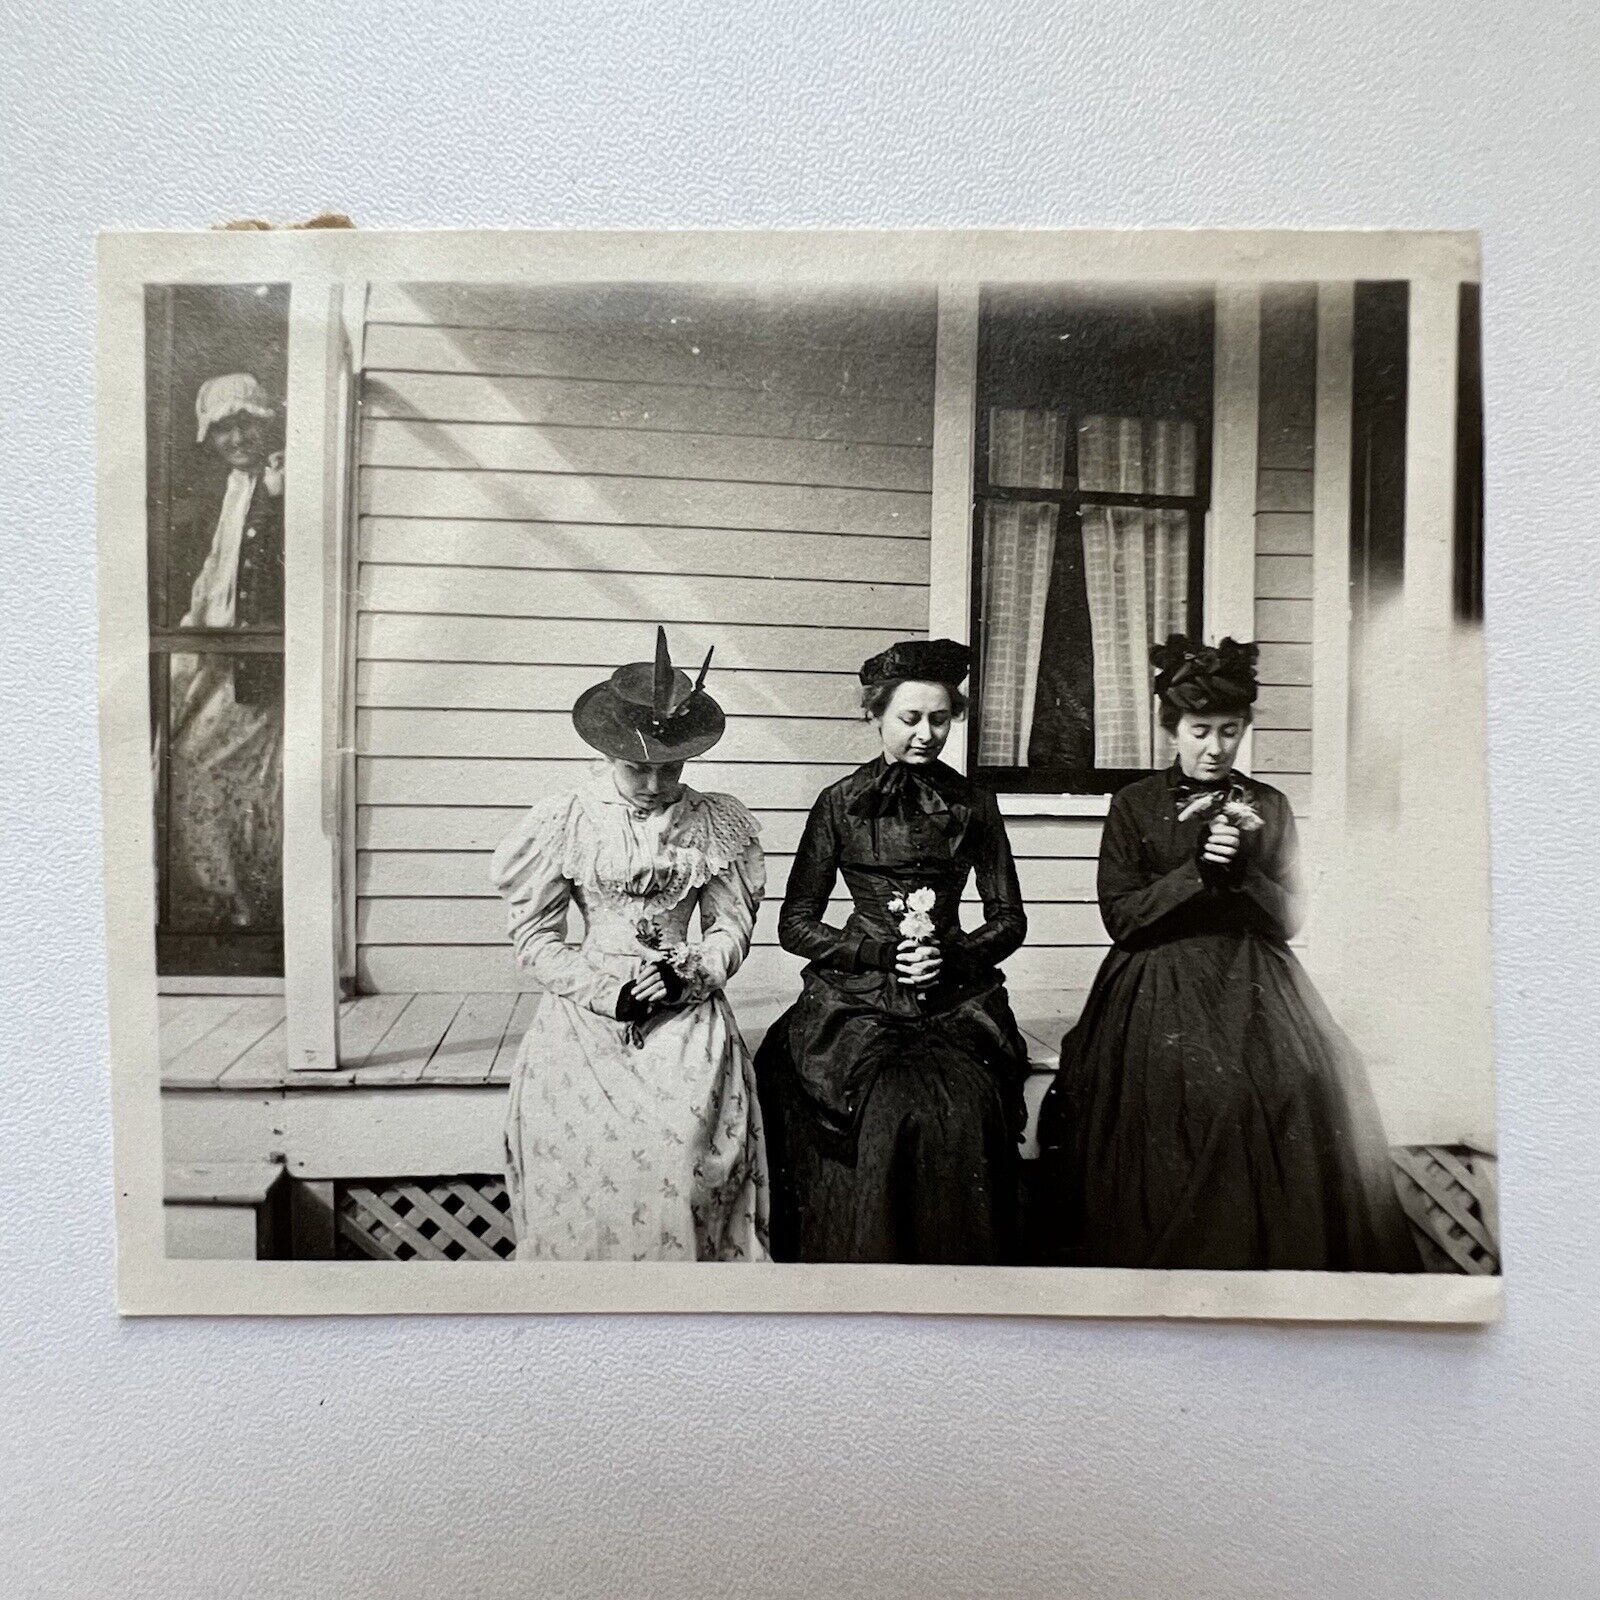 Antique Vintage Snapshot Photograph Beautiful Mourning Women Ghost Spirit Spooky